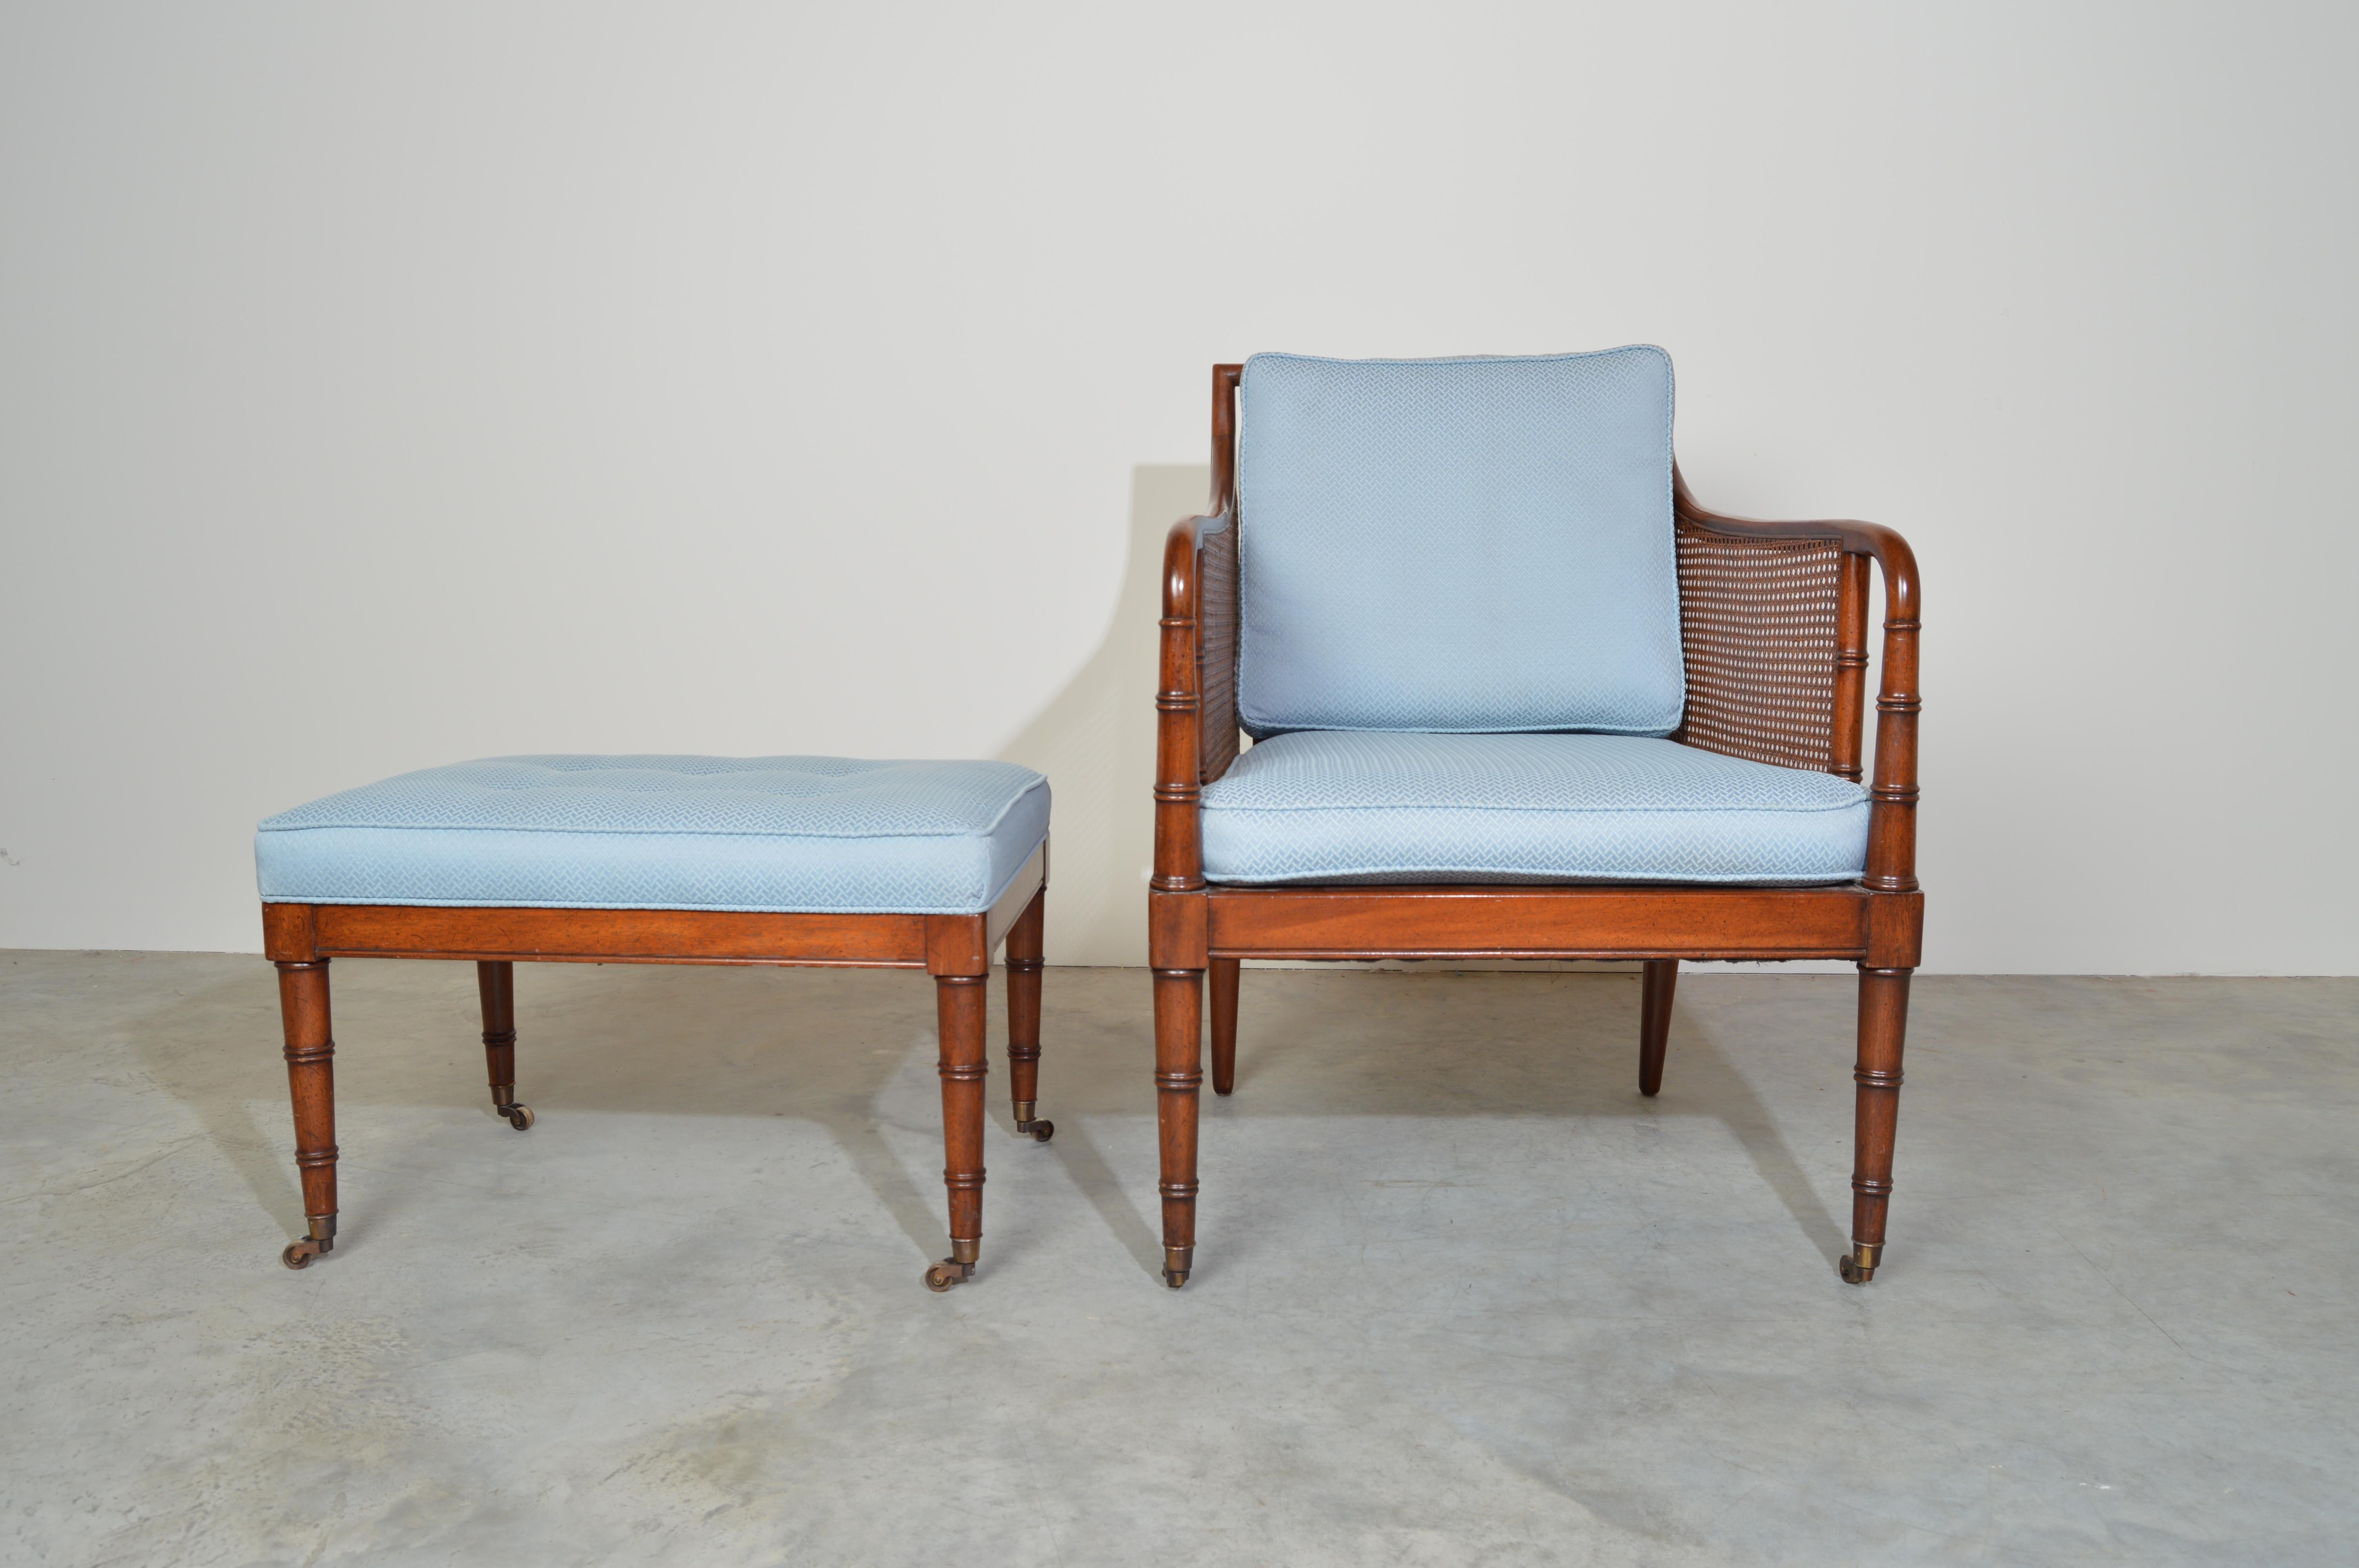 Mid-20th Century Hickory Chair & Ottoman Regency Style Faux Bamboo Caned Chair on Brass Casters